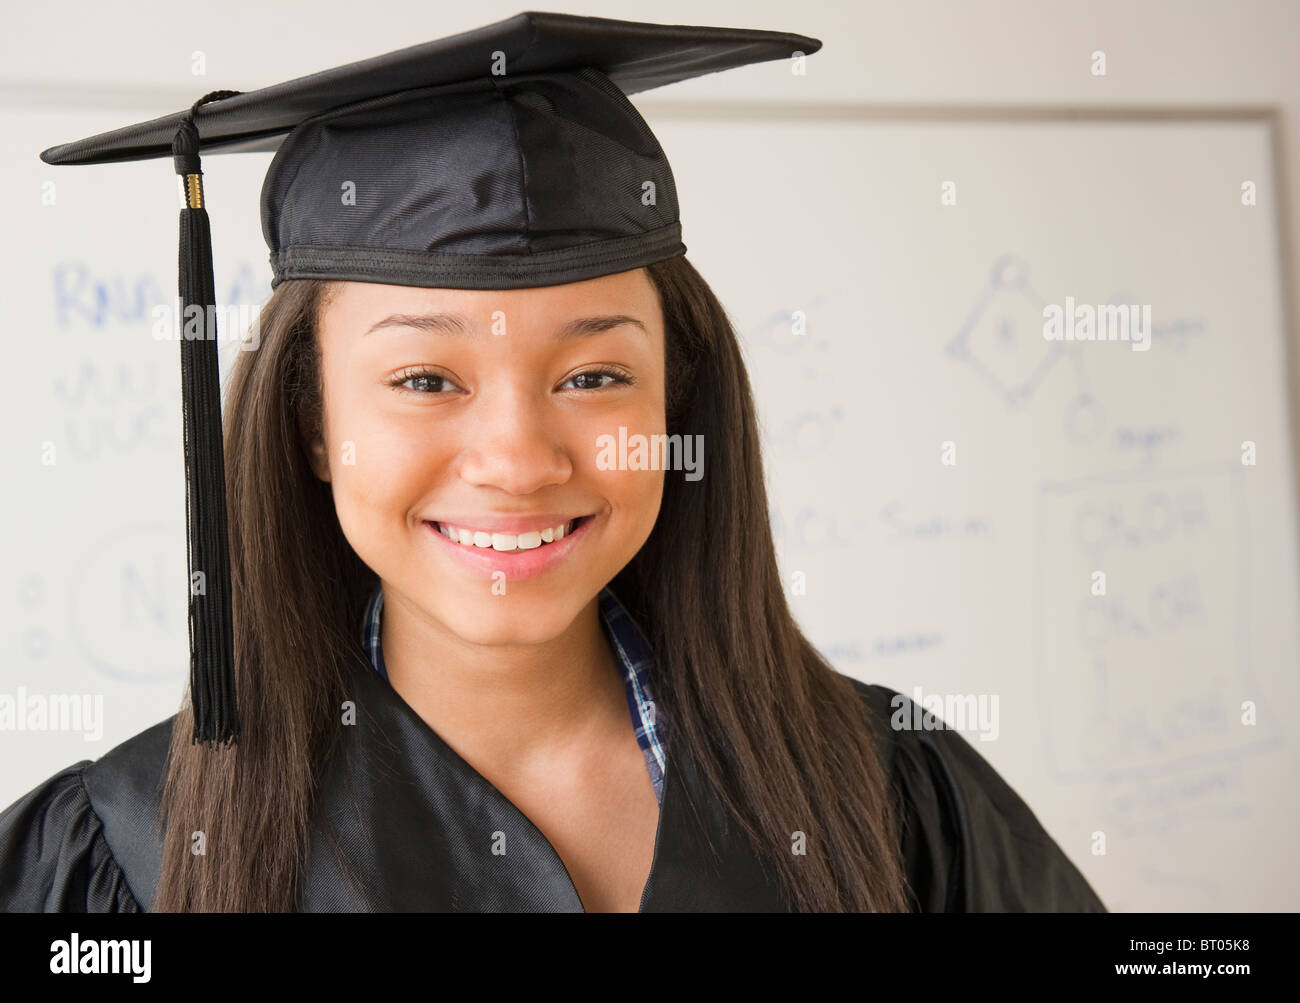 Asian Woman wearing cap and gown Banque D'Images